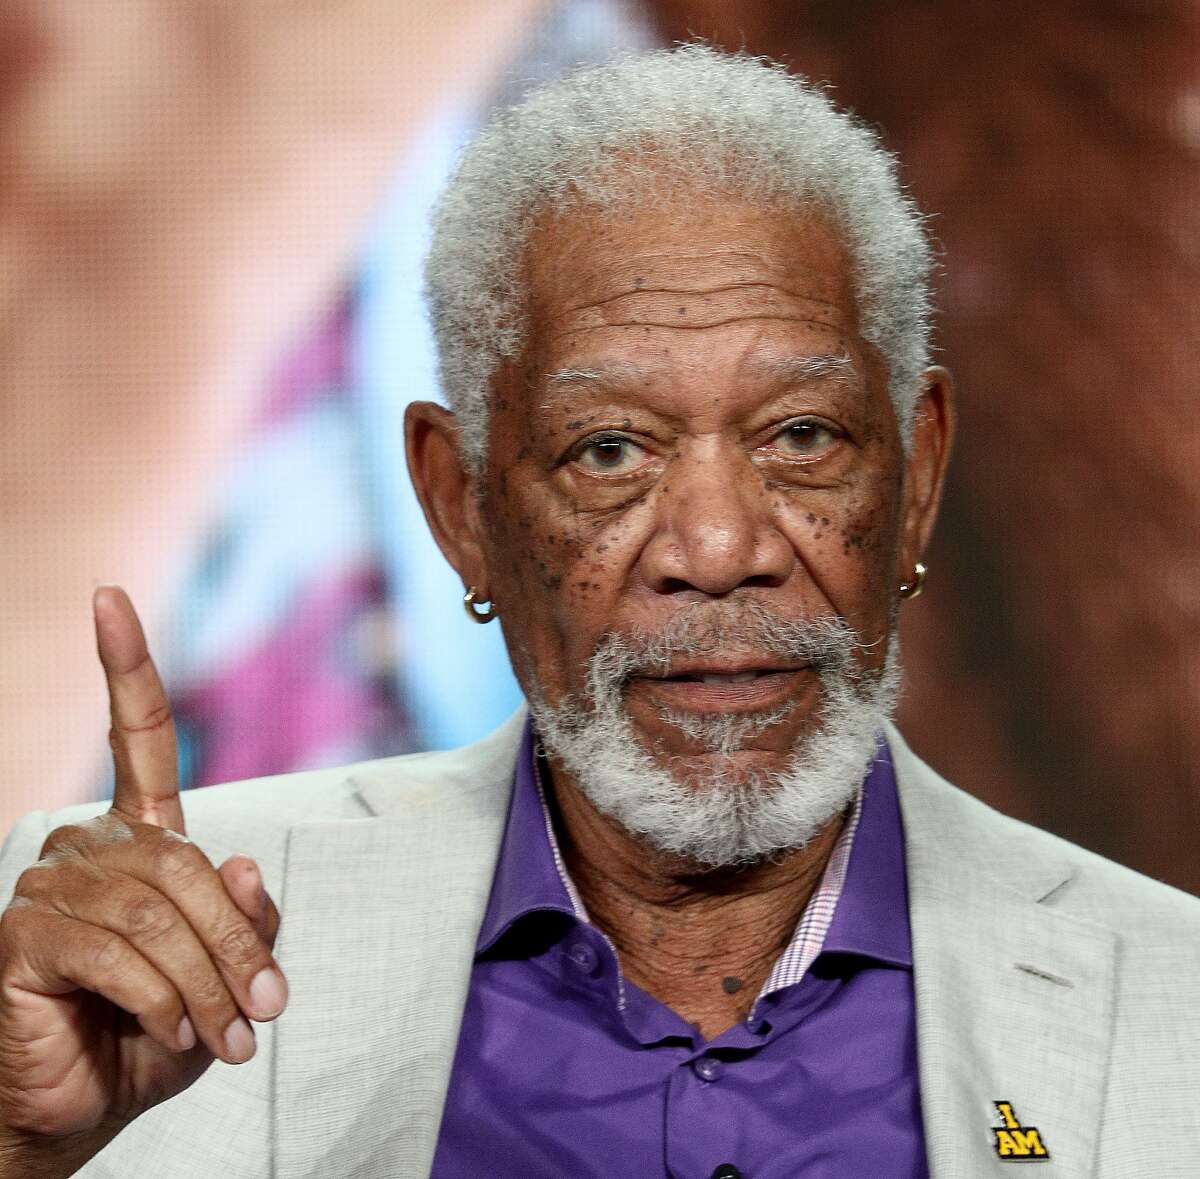 Morgan Freeman of the television show "The Story of God" speaks during the National Geographic segment of the 2019 Winter Television Critics Association Press Tour at The Langham Huntington, Pasadena on Feb. 10, 2019 in Pasadena, Calif.